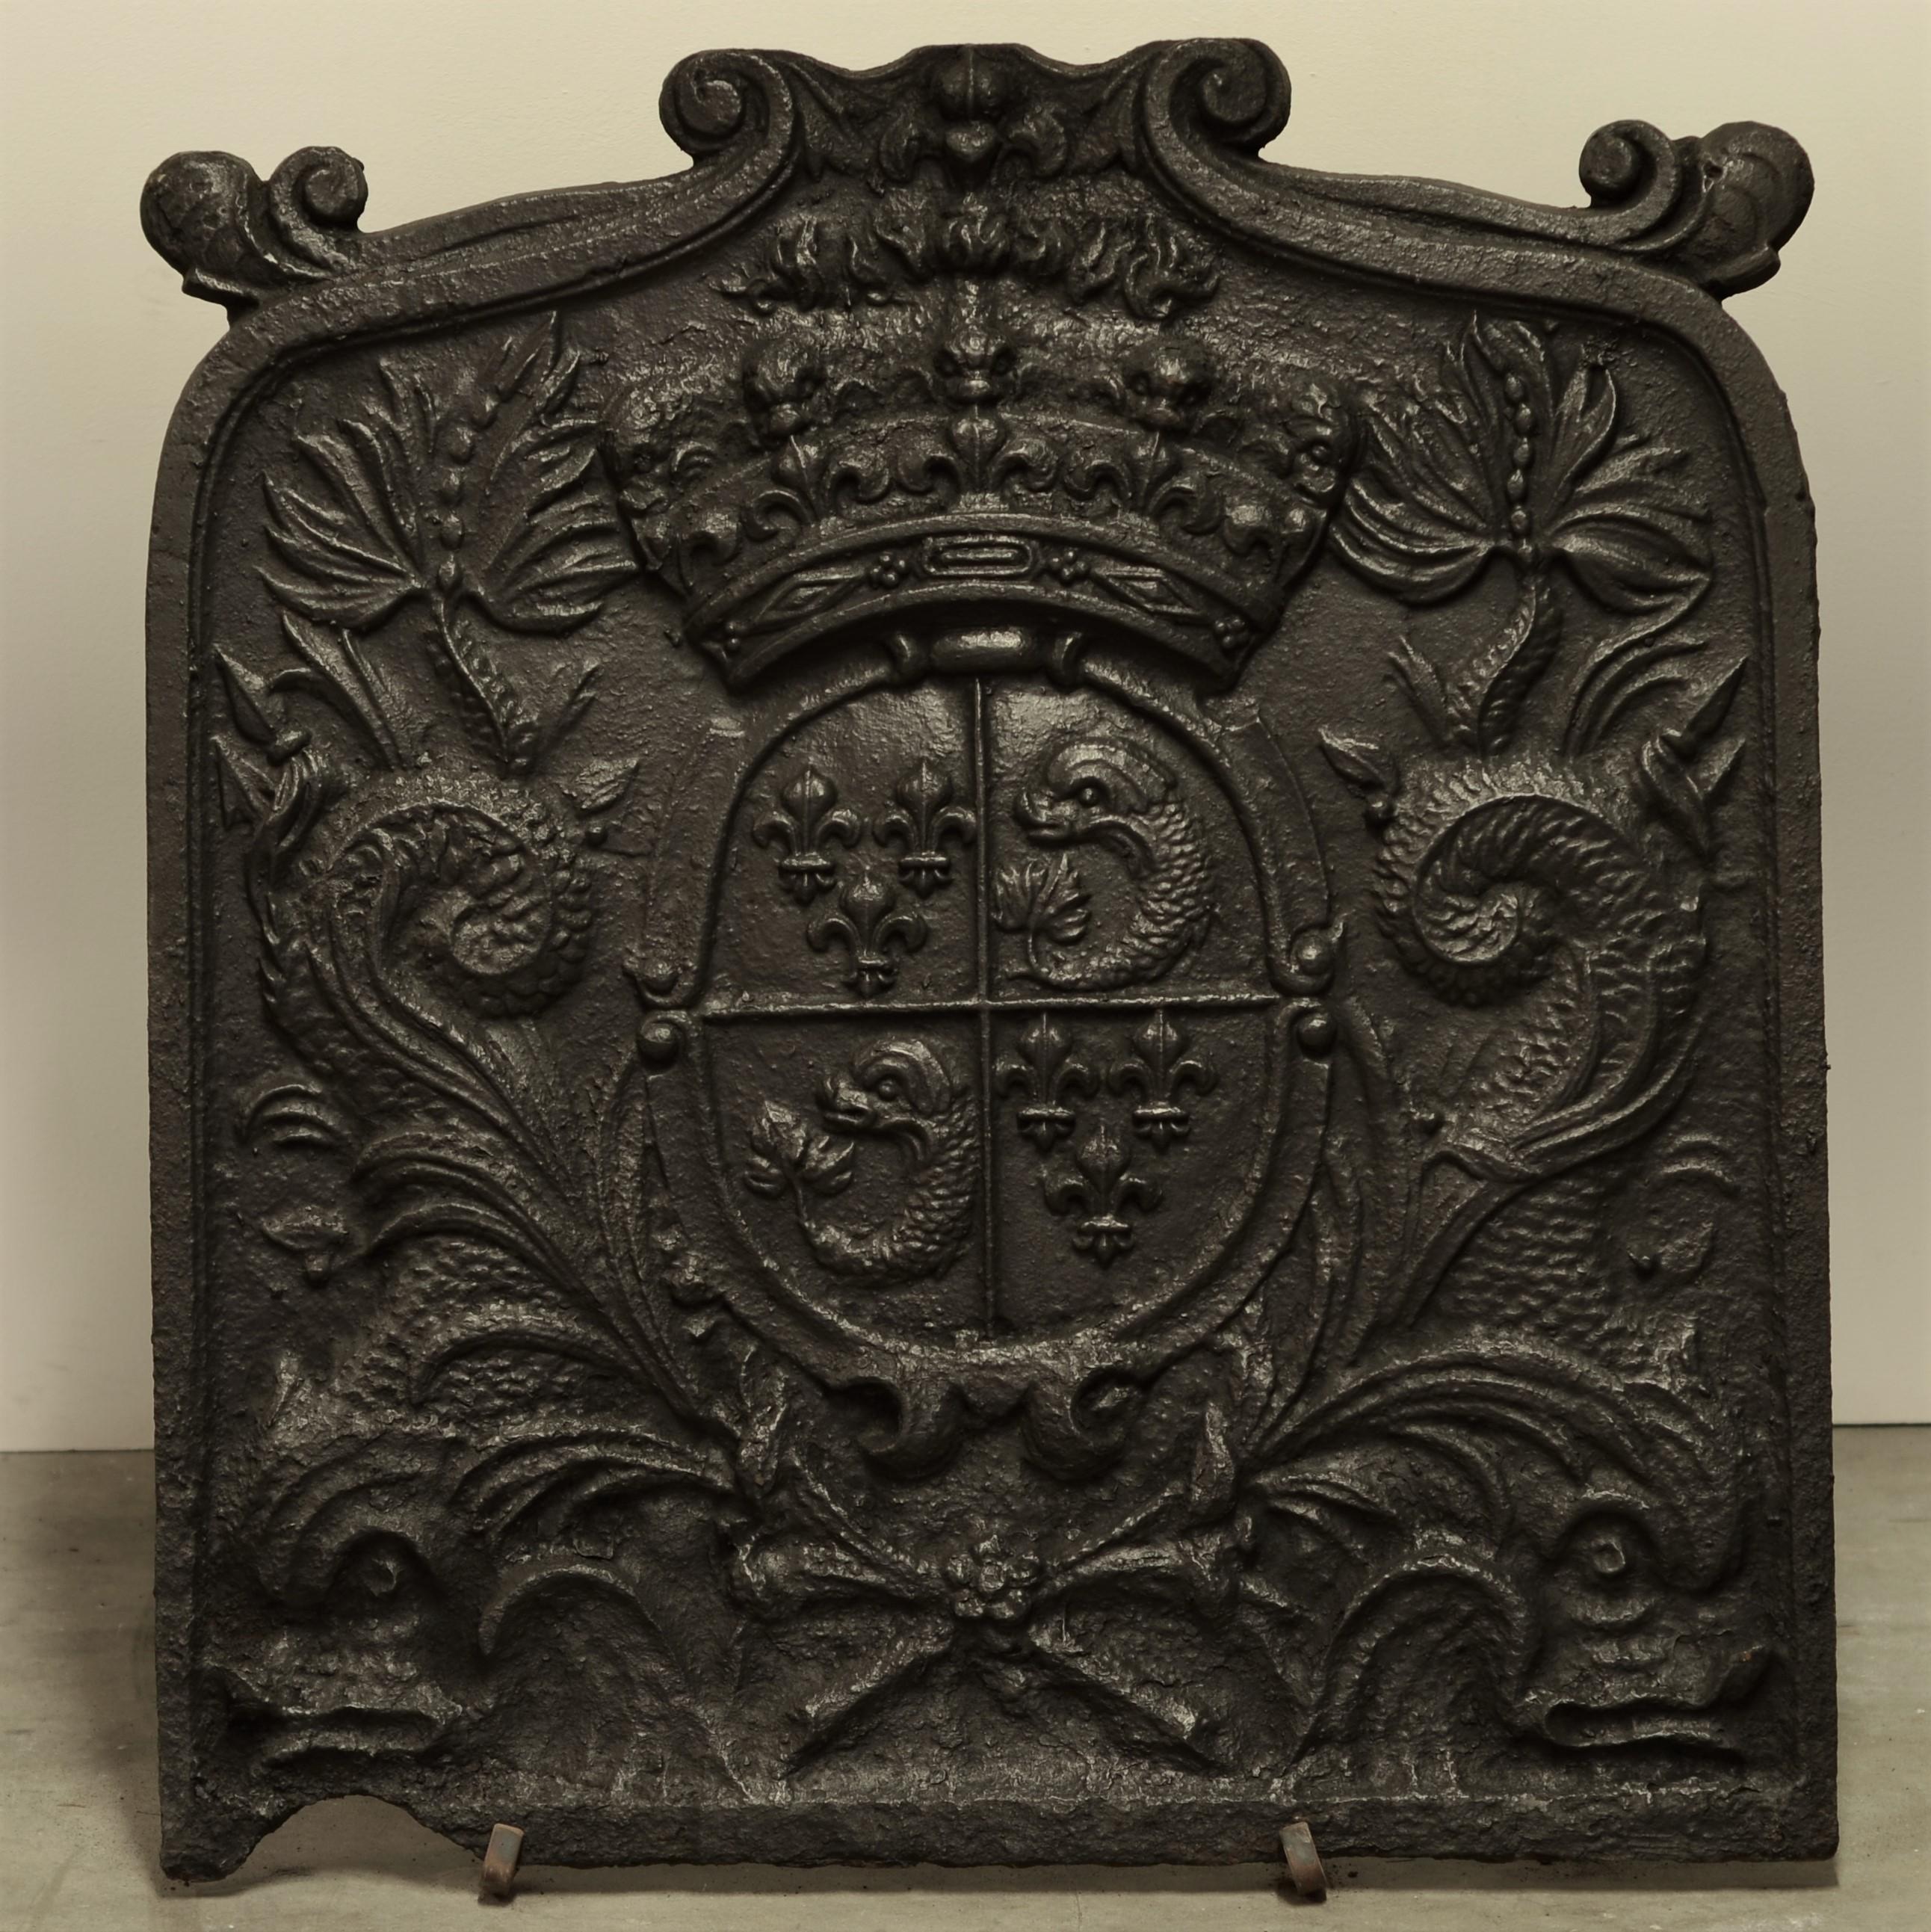 Antique fireback / backsplash

Nice 19th century French Napoleon III fireback / backsplash showing the coat of arms of the House of Bourbon. This royal French family was a major dynasty in Europe. 

Beautiful original condition, left bottom has